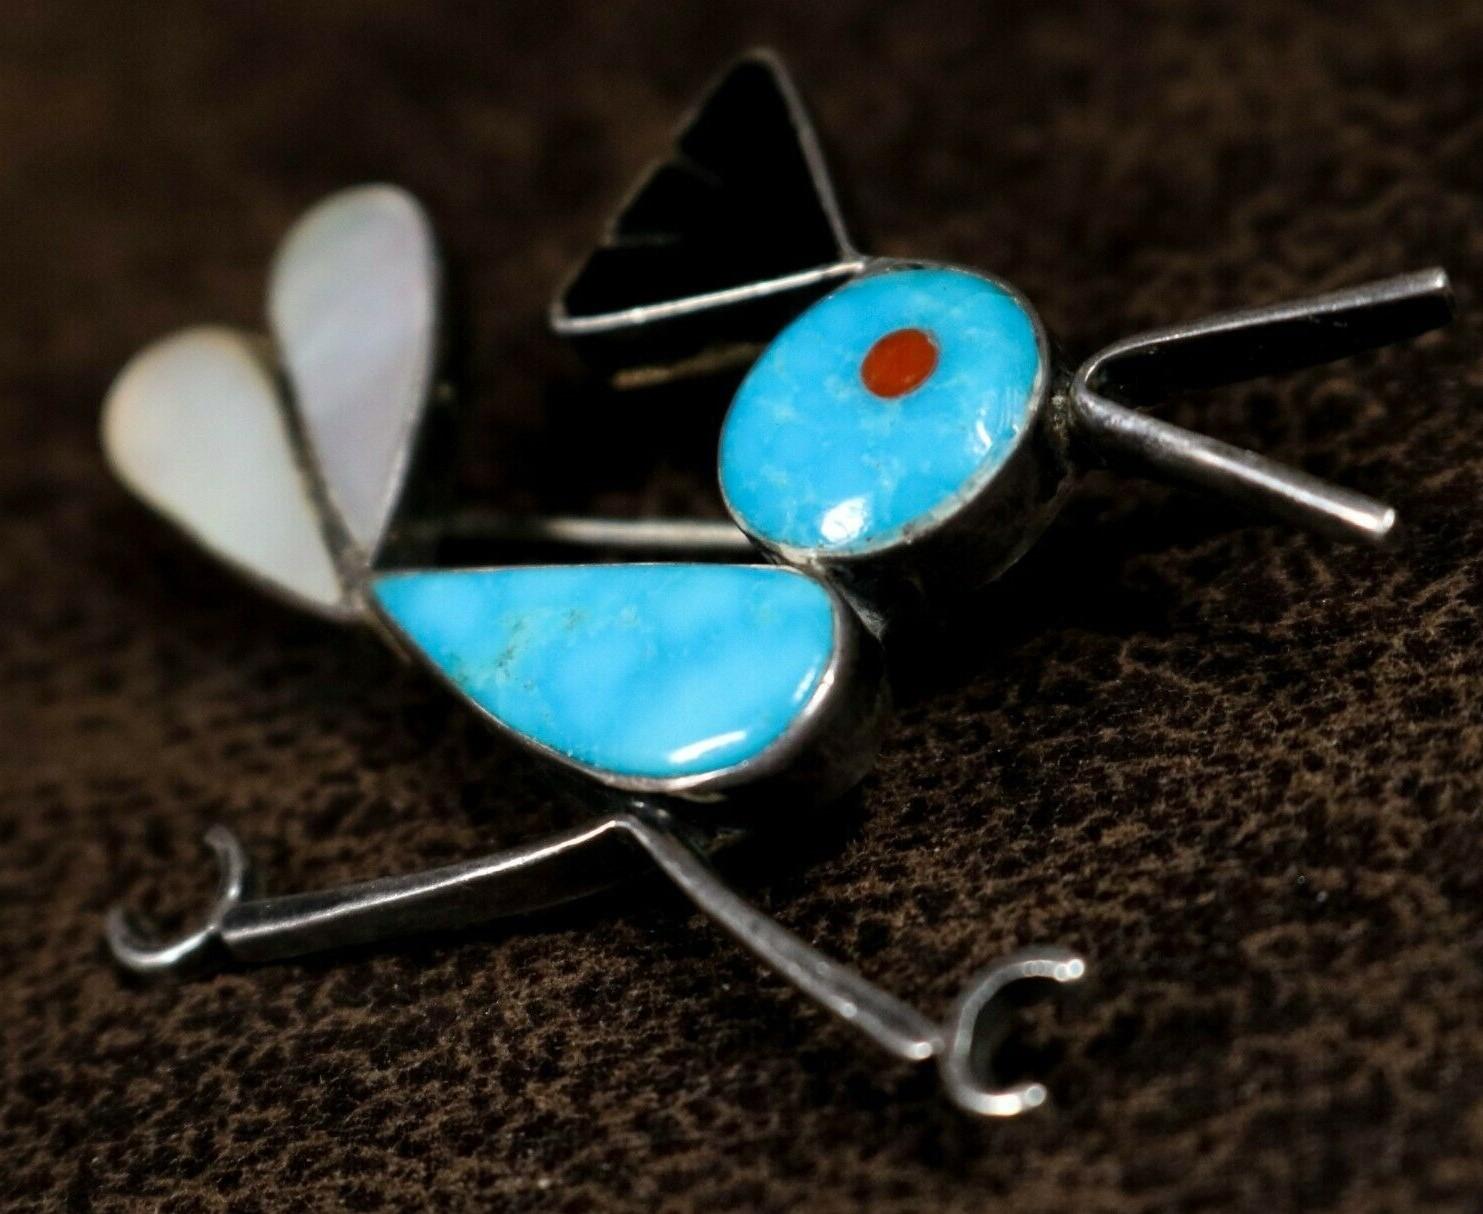 Fabulous Vintage Roadrunner Brooch, Flush Hand set Inlay of Turquoise, Coral and Mother of Pearl. Signed: DAVE MEUMANN. Hand crafted Sterling Silver mounting. Measures approx. 2